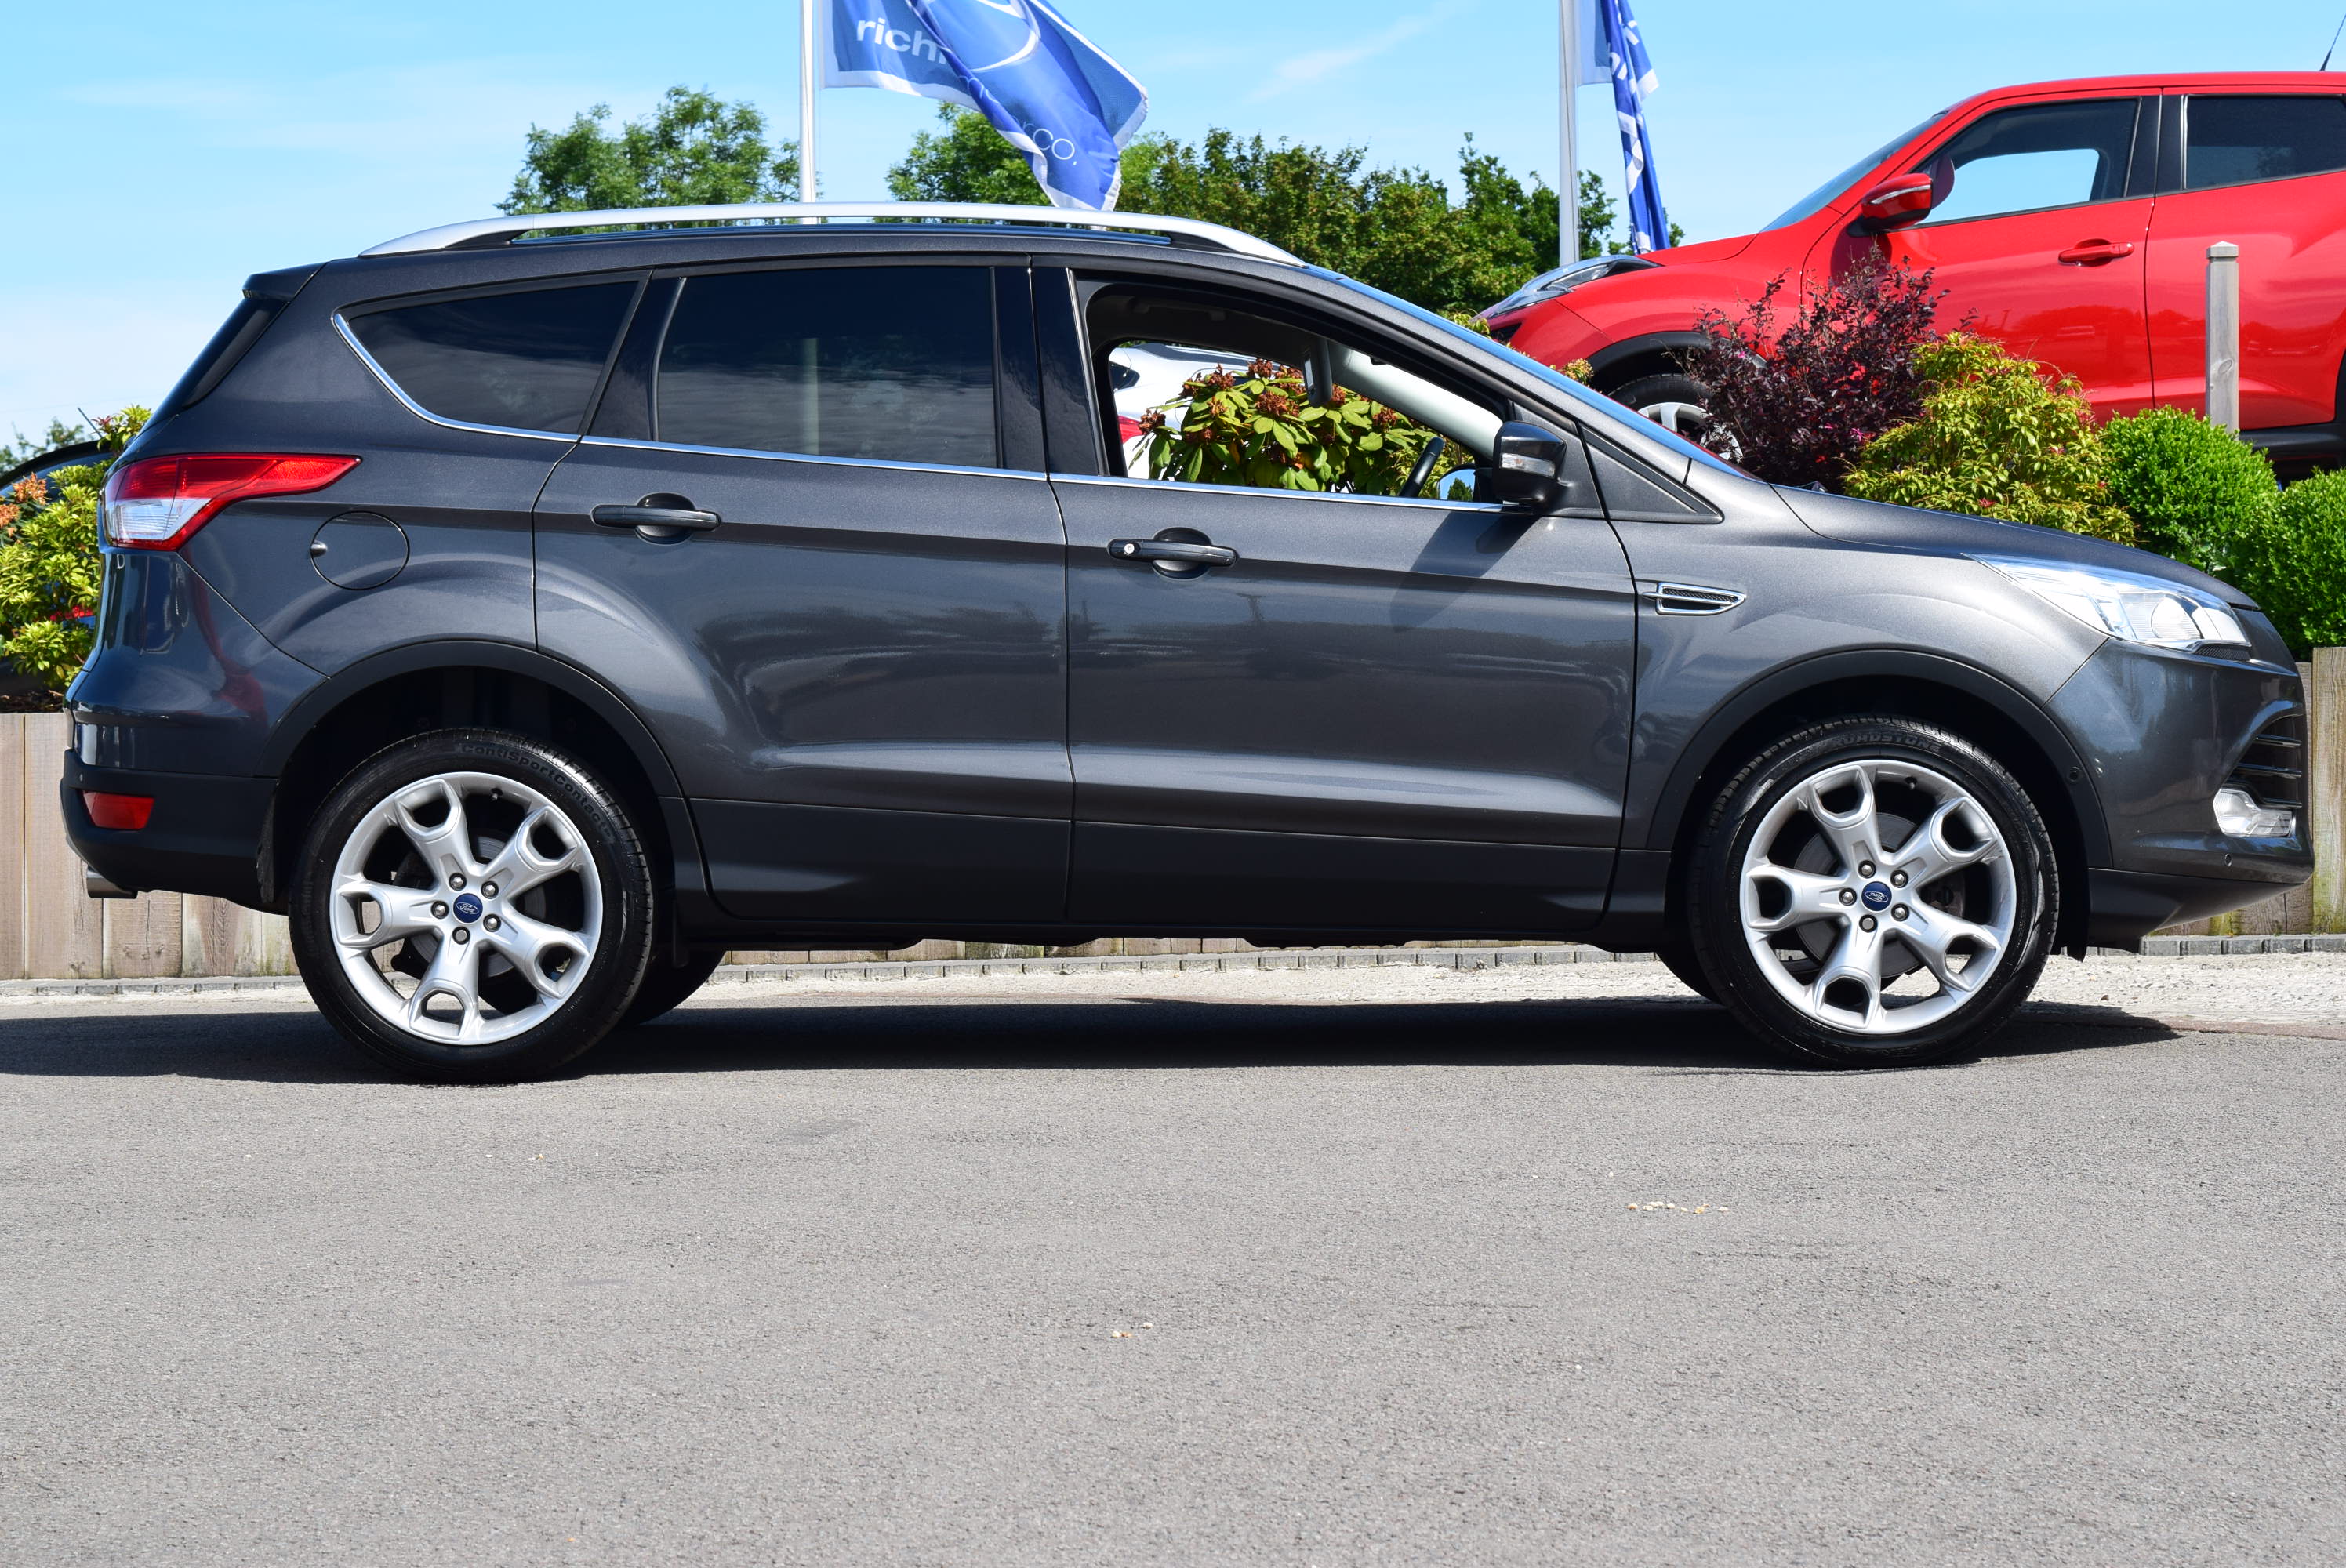 FORD KUGA 2.0 TDCi 150 Titanium 5dr 2WD For Sale